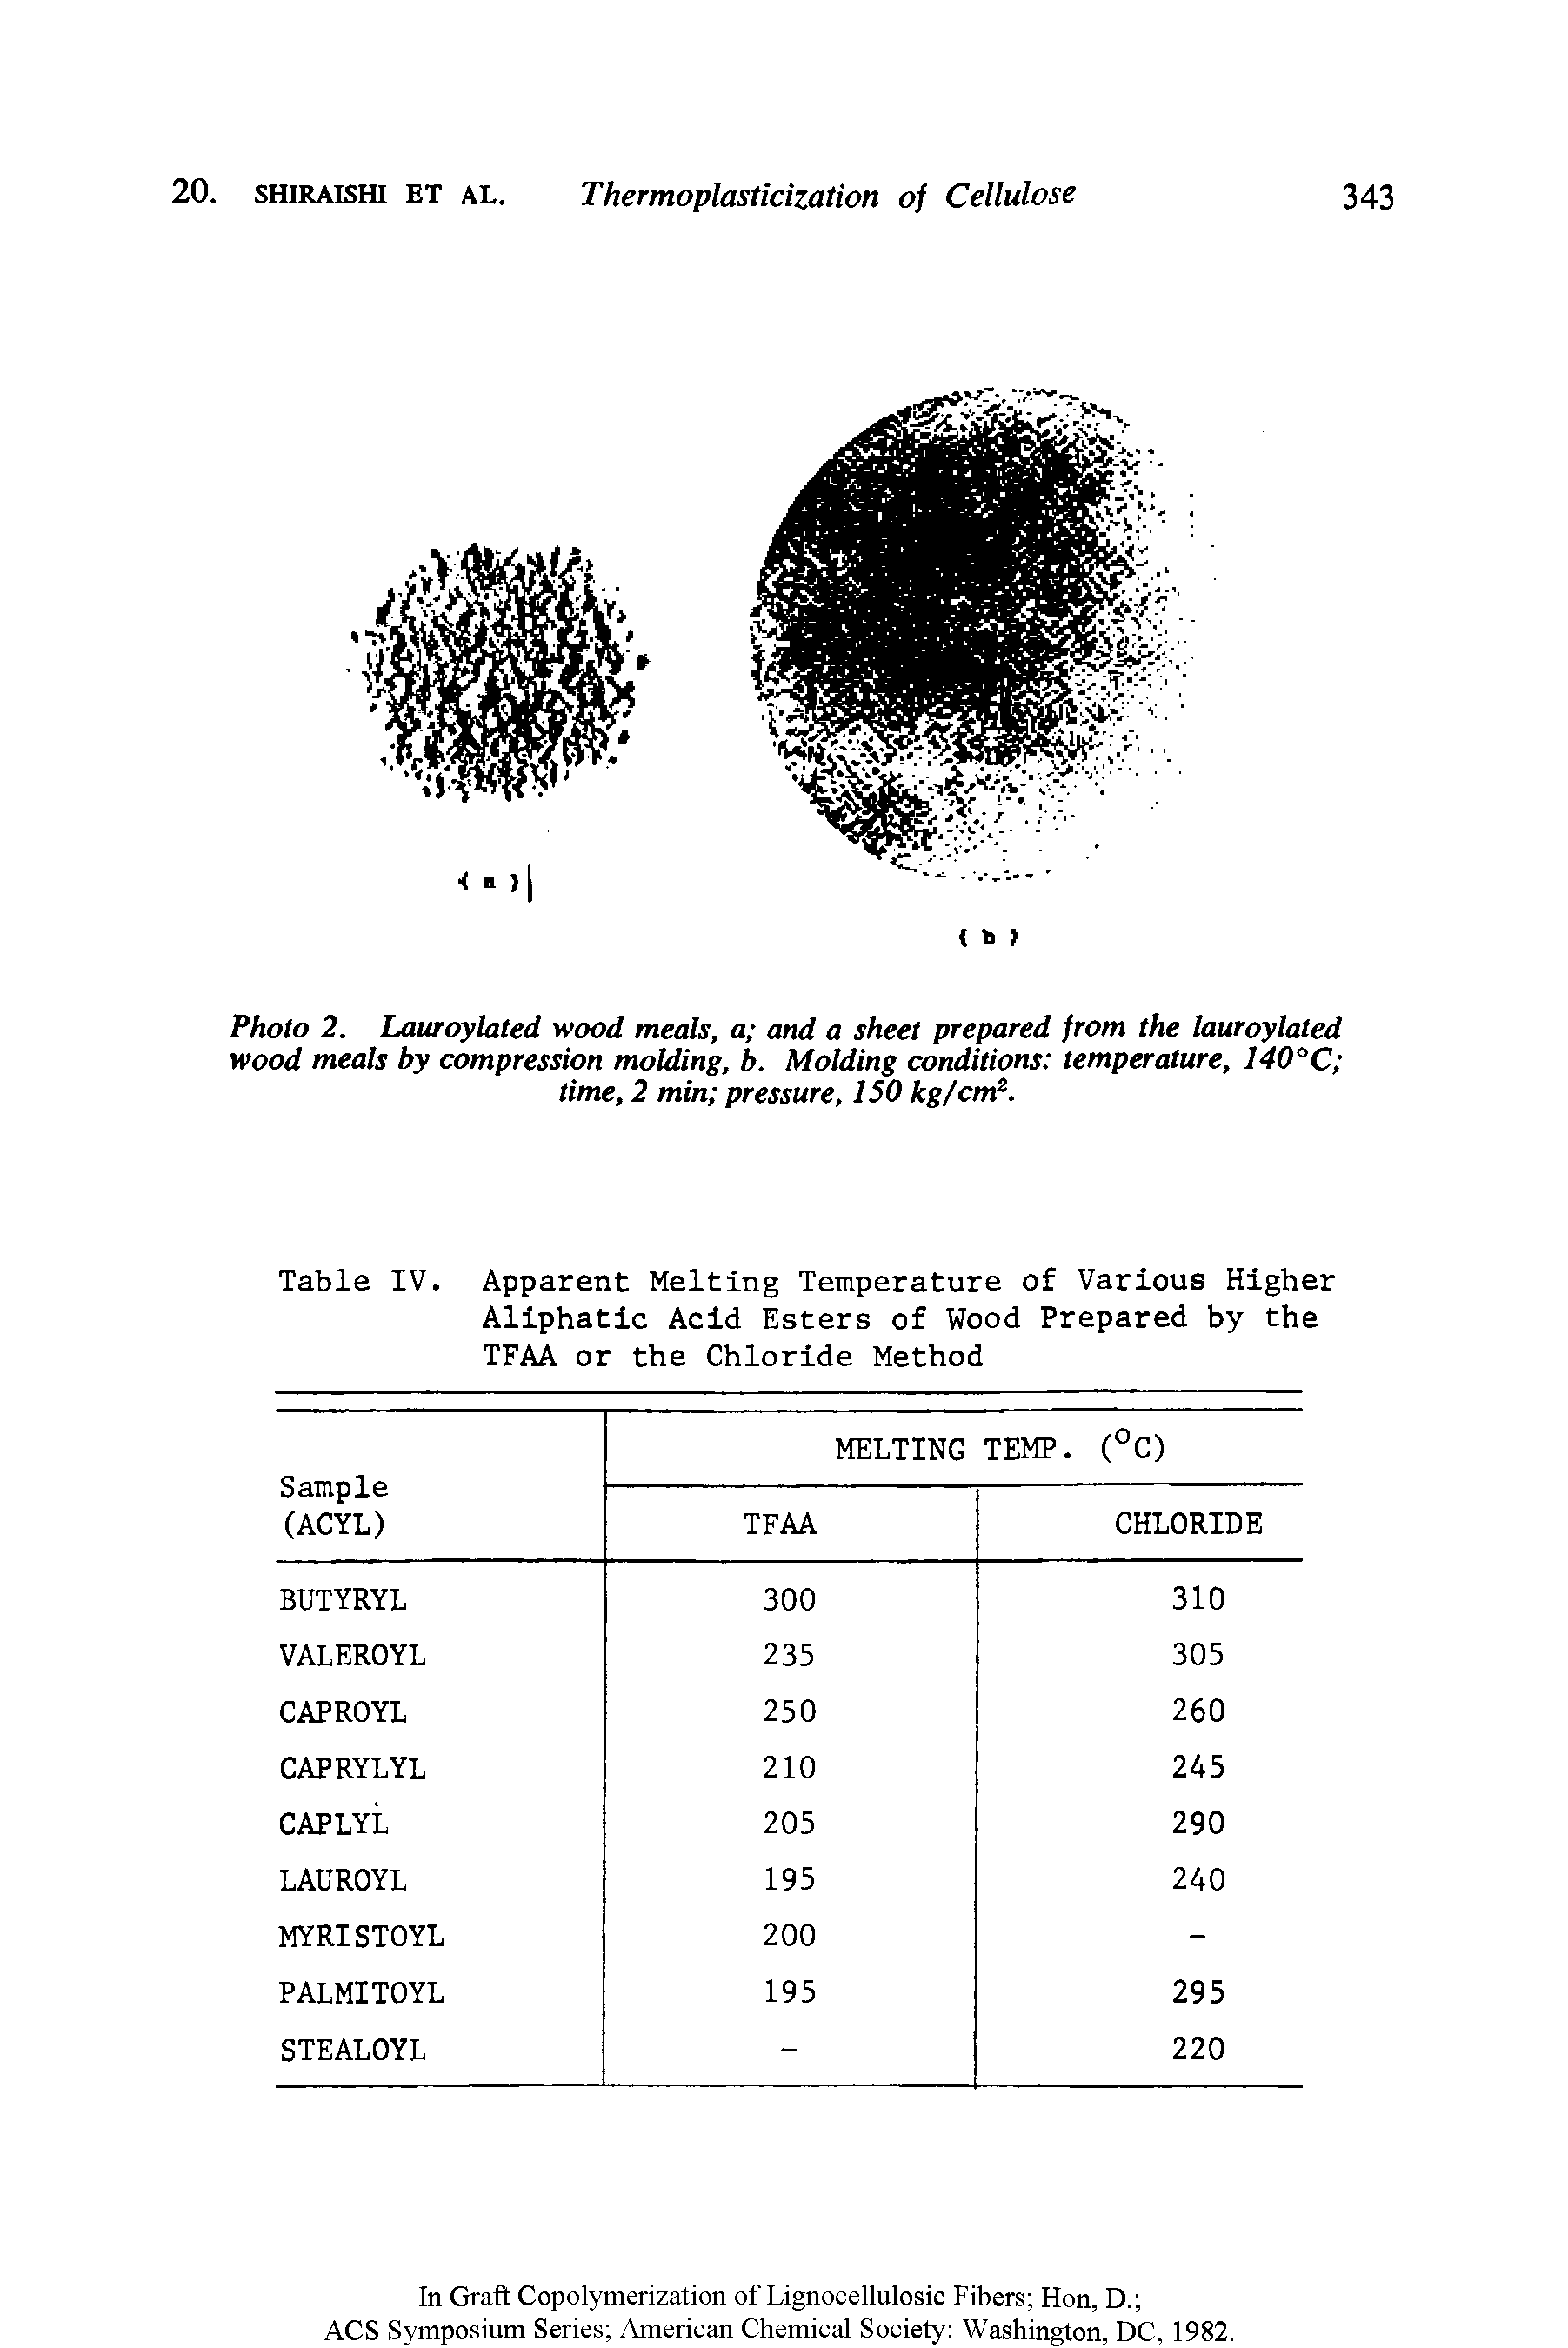 Table IV. Apparent Melting Temperature of Various Higher Aliphatic Acid Esters of Wood Prepared by the TFAA or the Chloride Method...